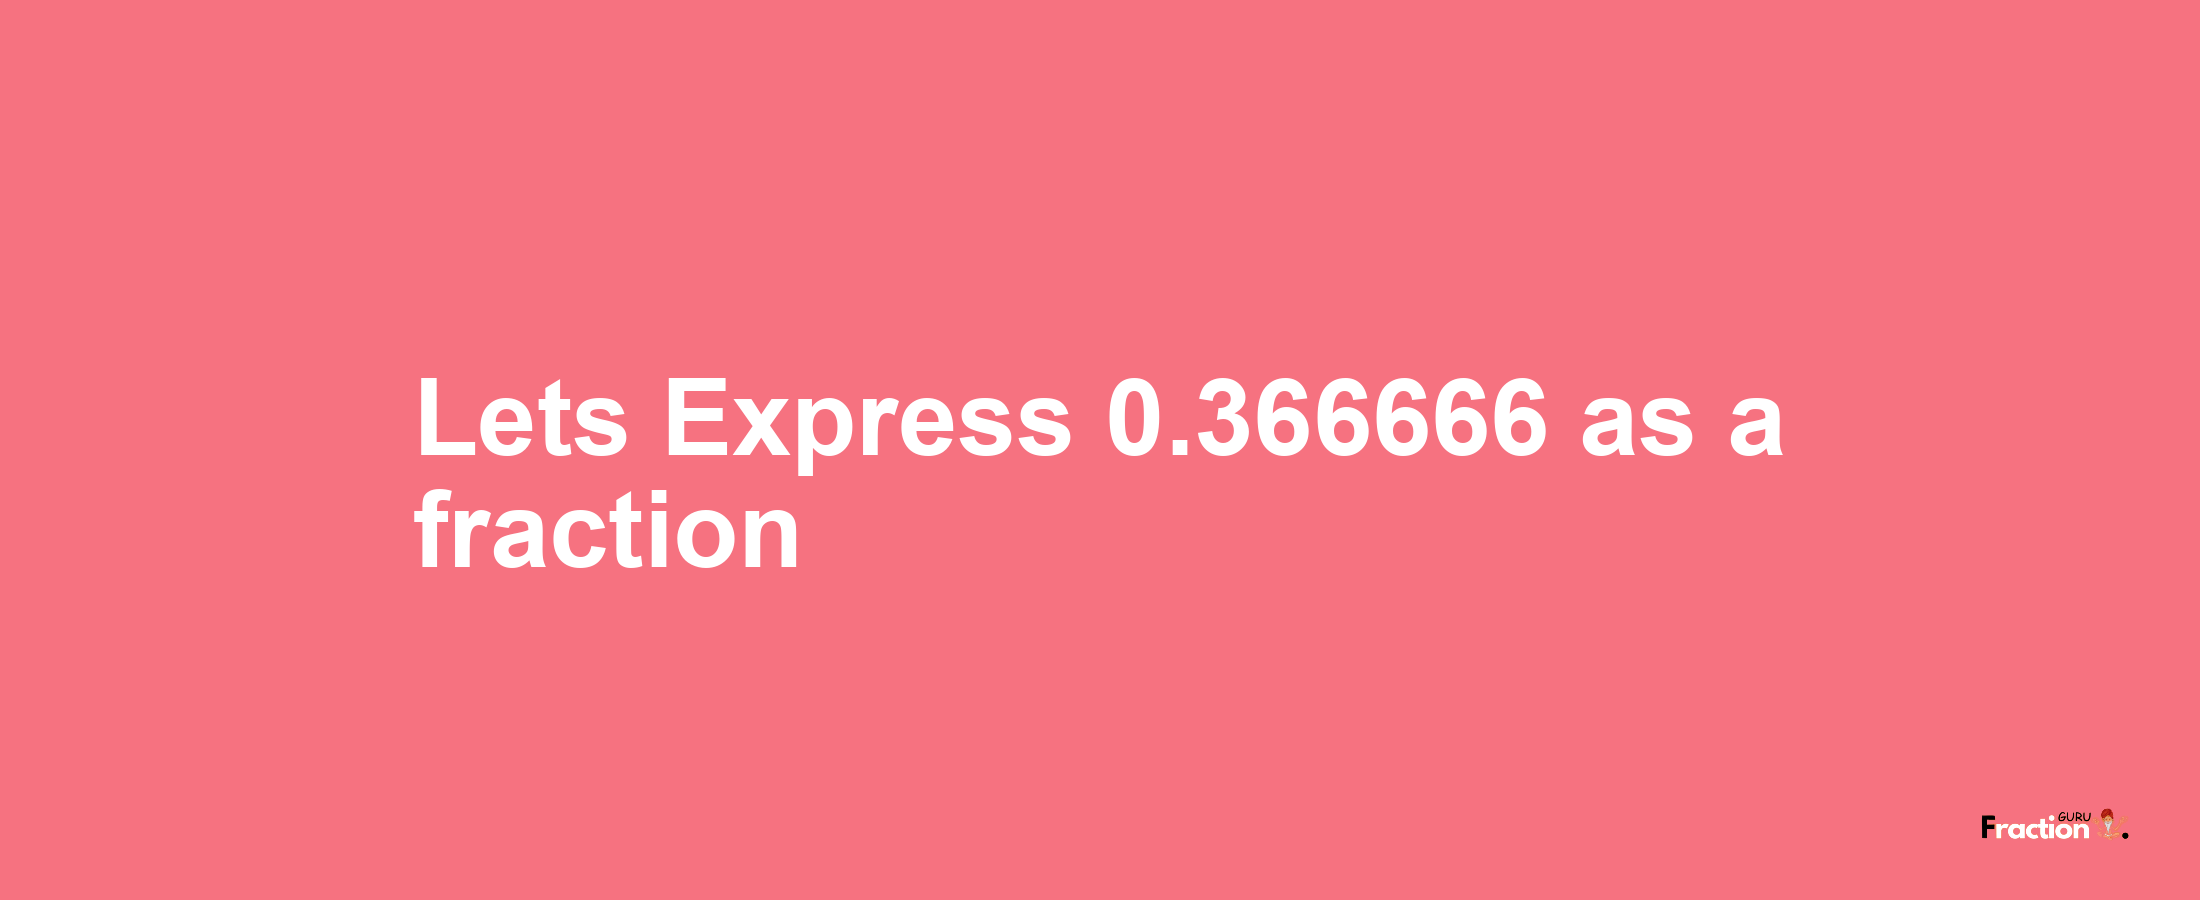 Lets Express 0.366666 as afraction